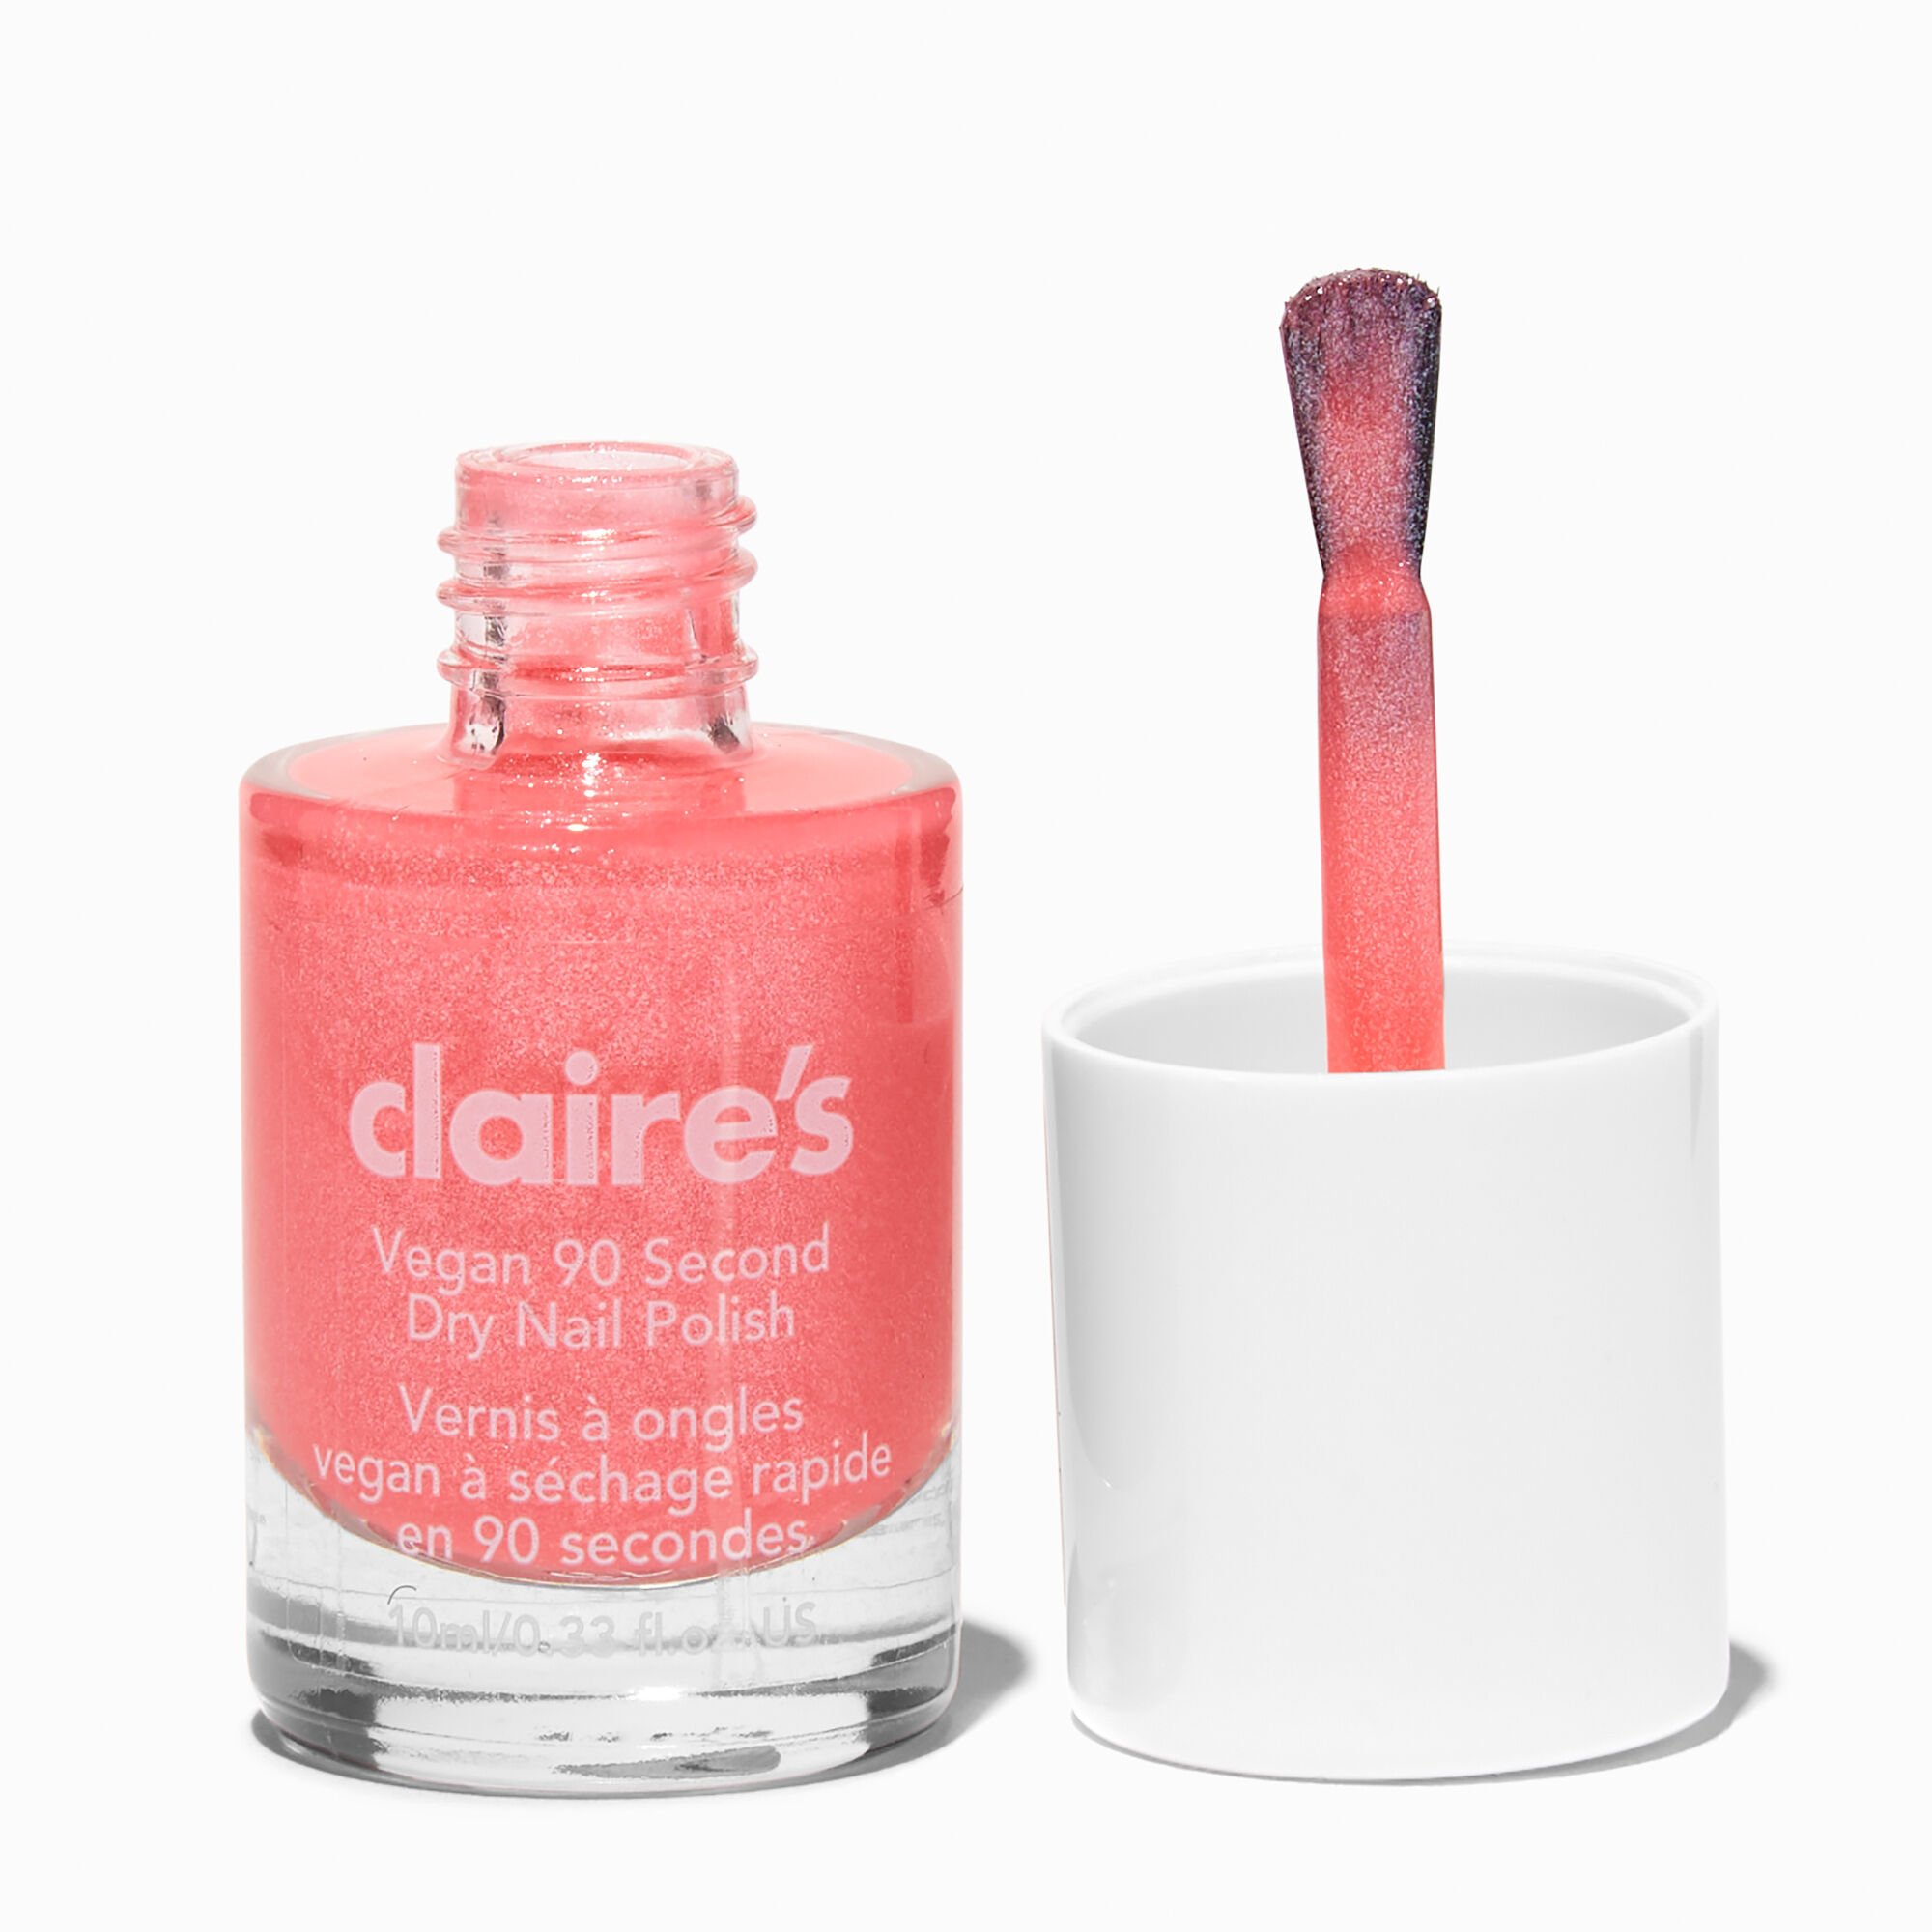 View Claires Vegan 90 Second Dry Nail Polish Dazzle Them information